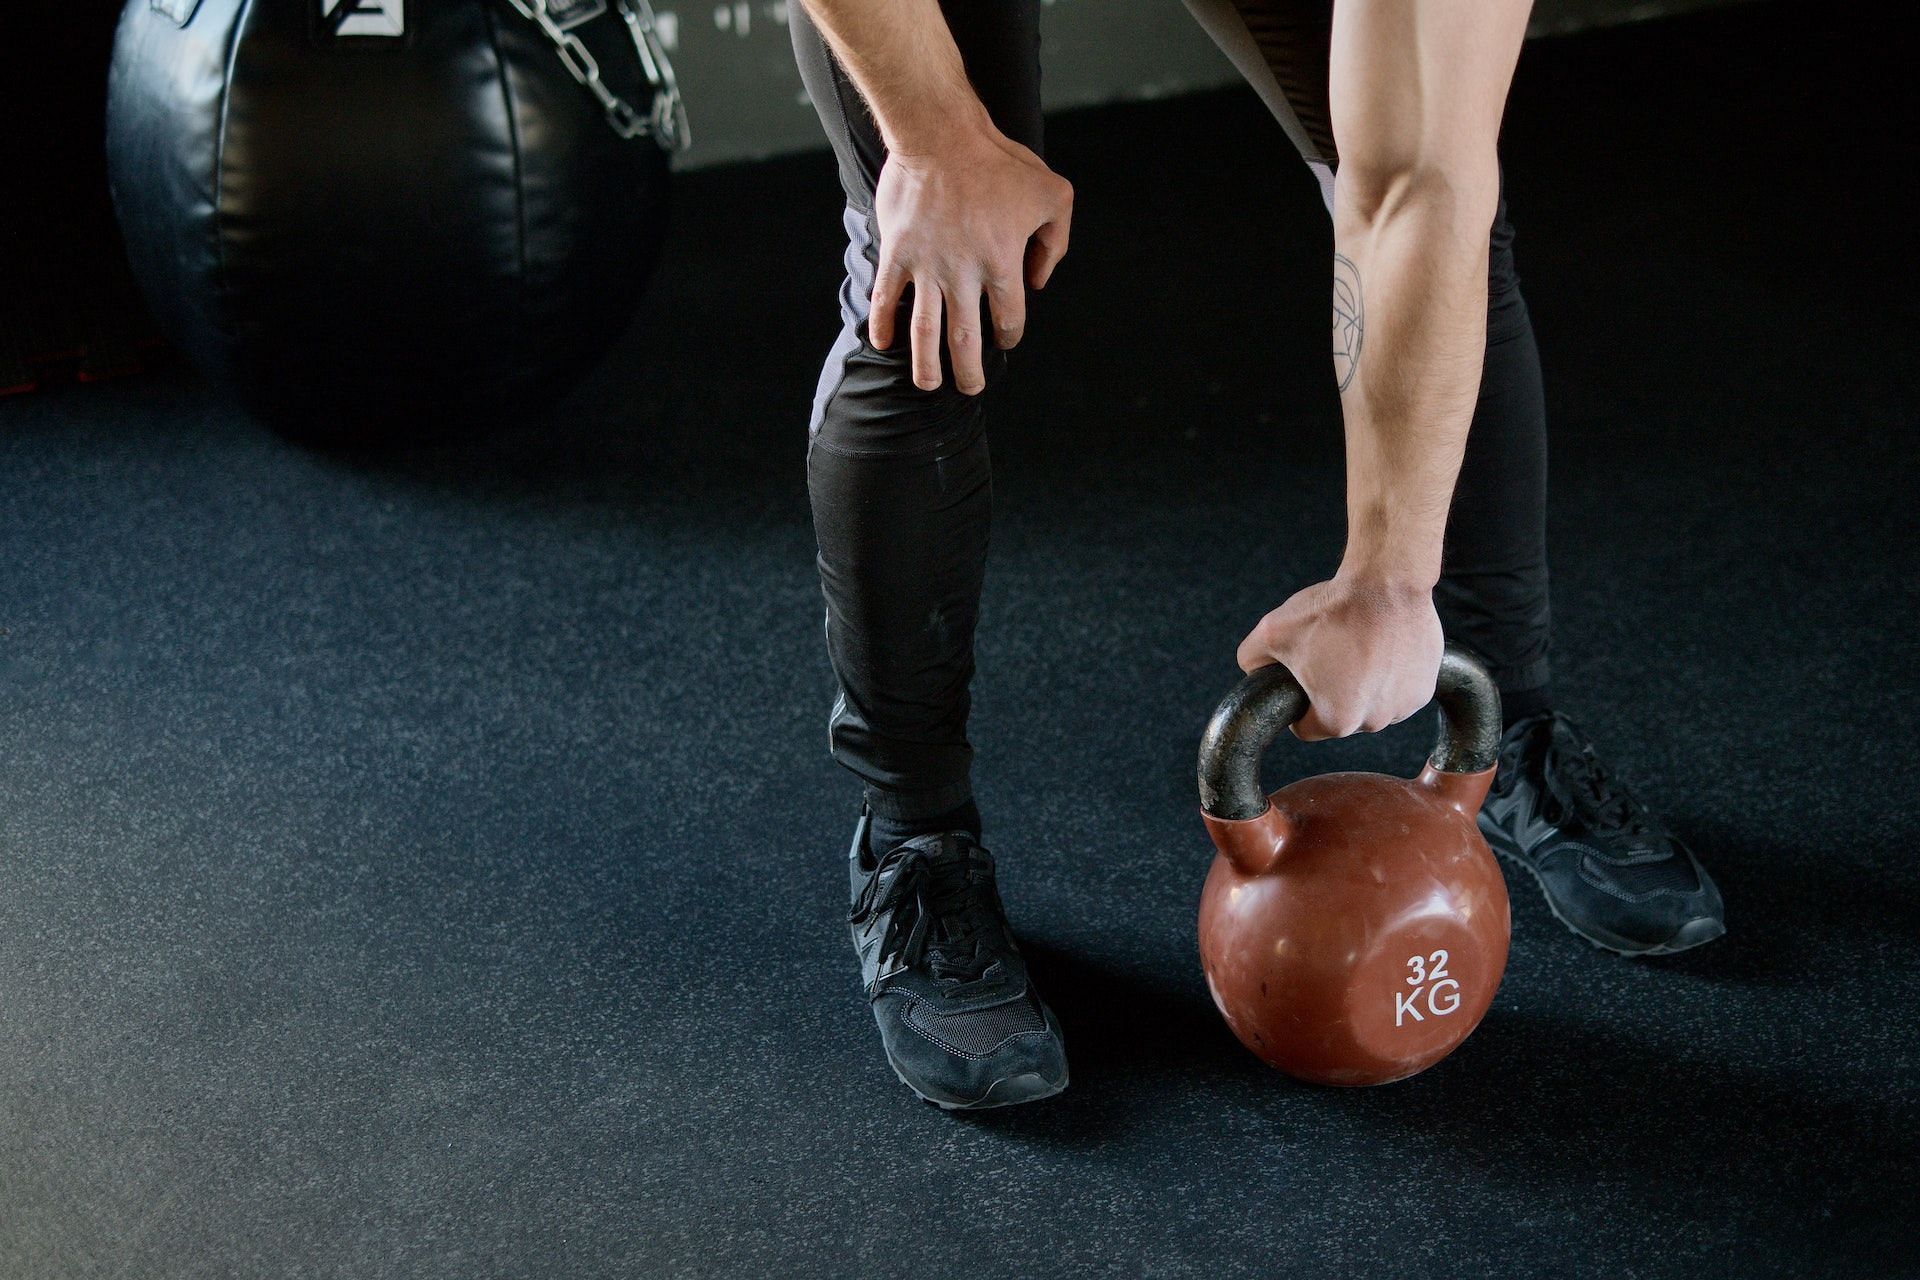 Kettlebell Turkish get-up is one of the most strengthening arm workouts with weights. (Photo via Pexels/Ivan Samkov)